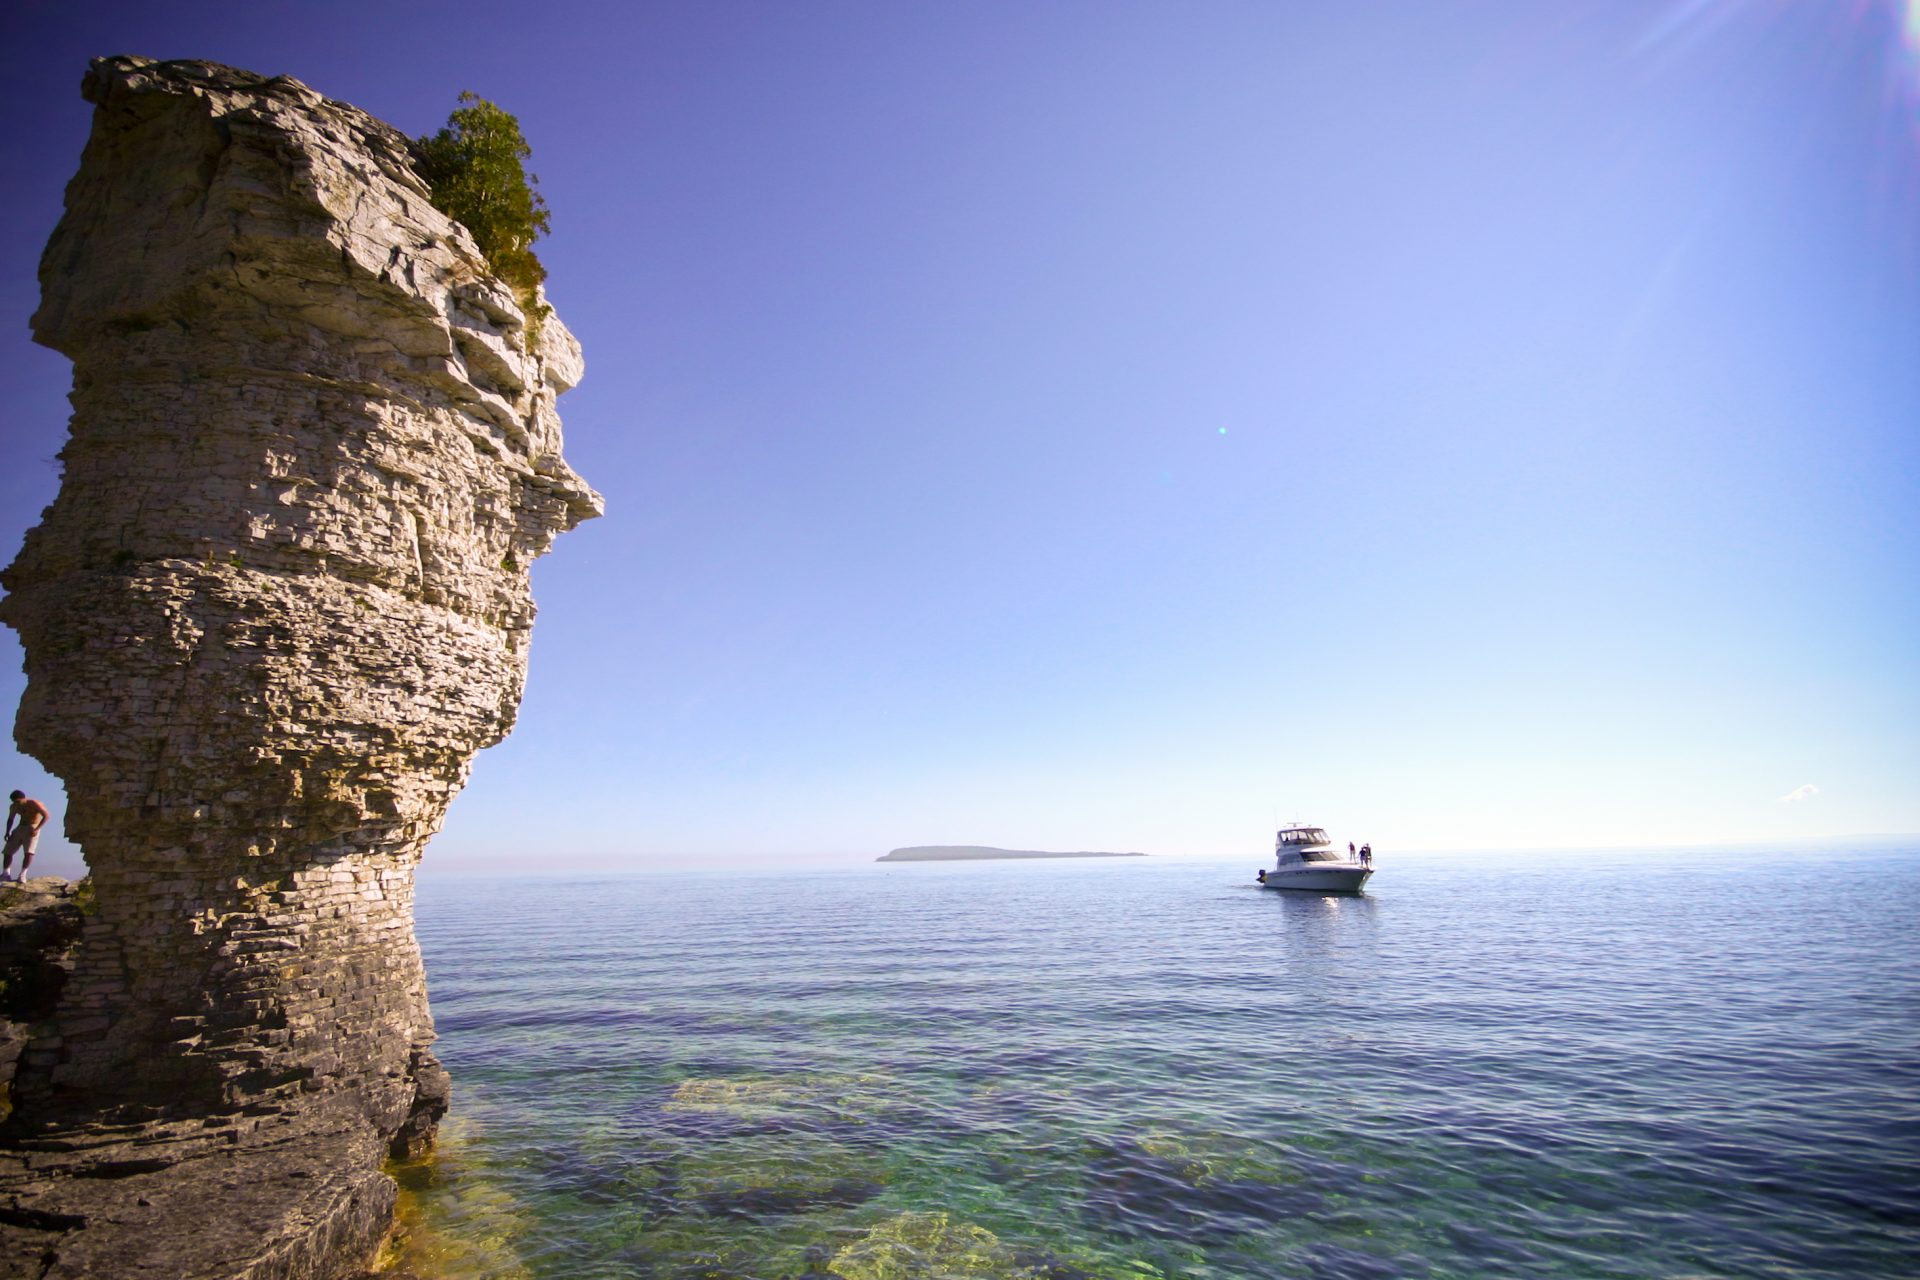 View of rock towers and lake surrounding Flowerpot Island.